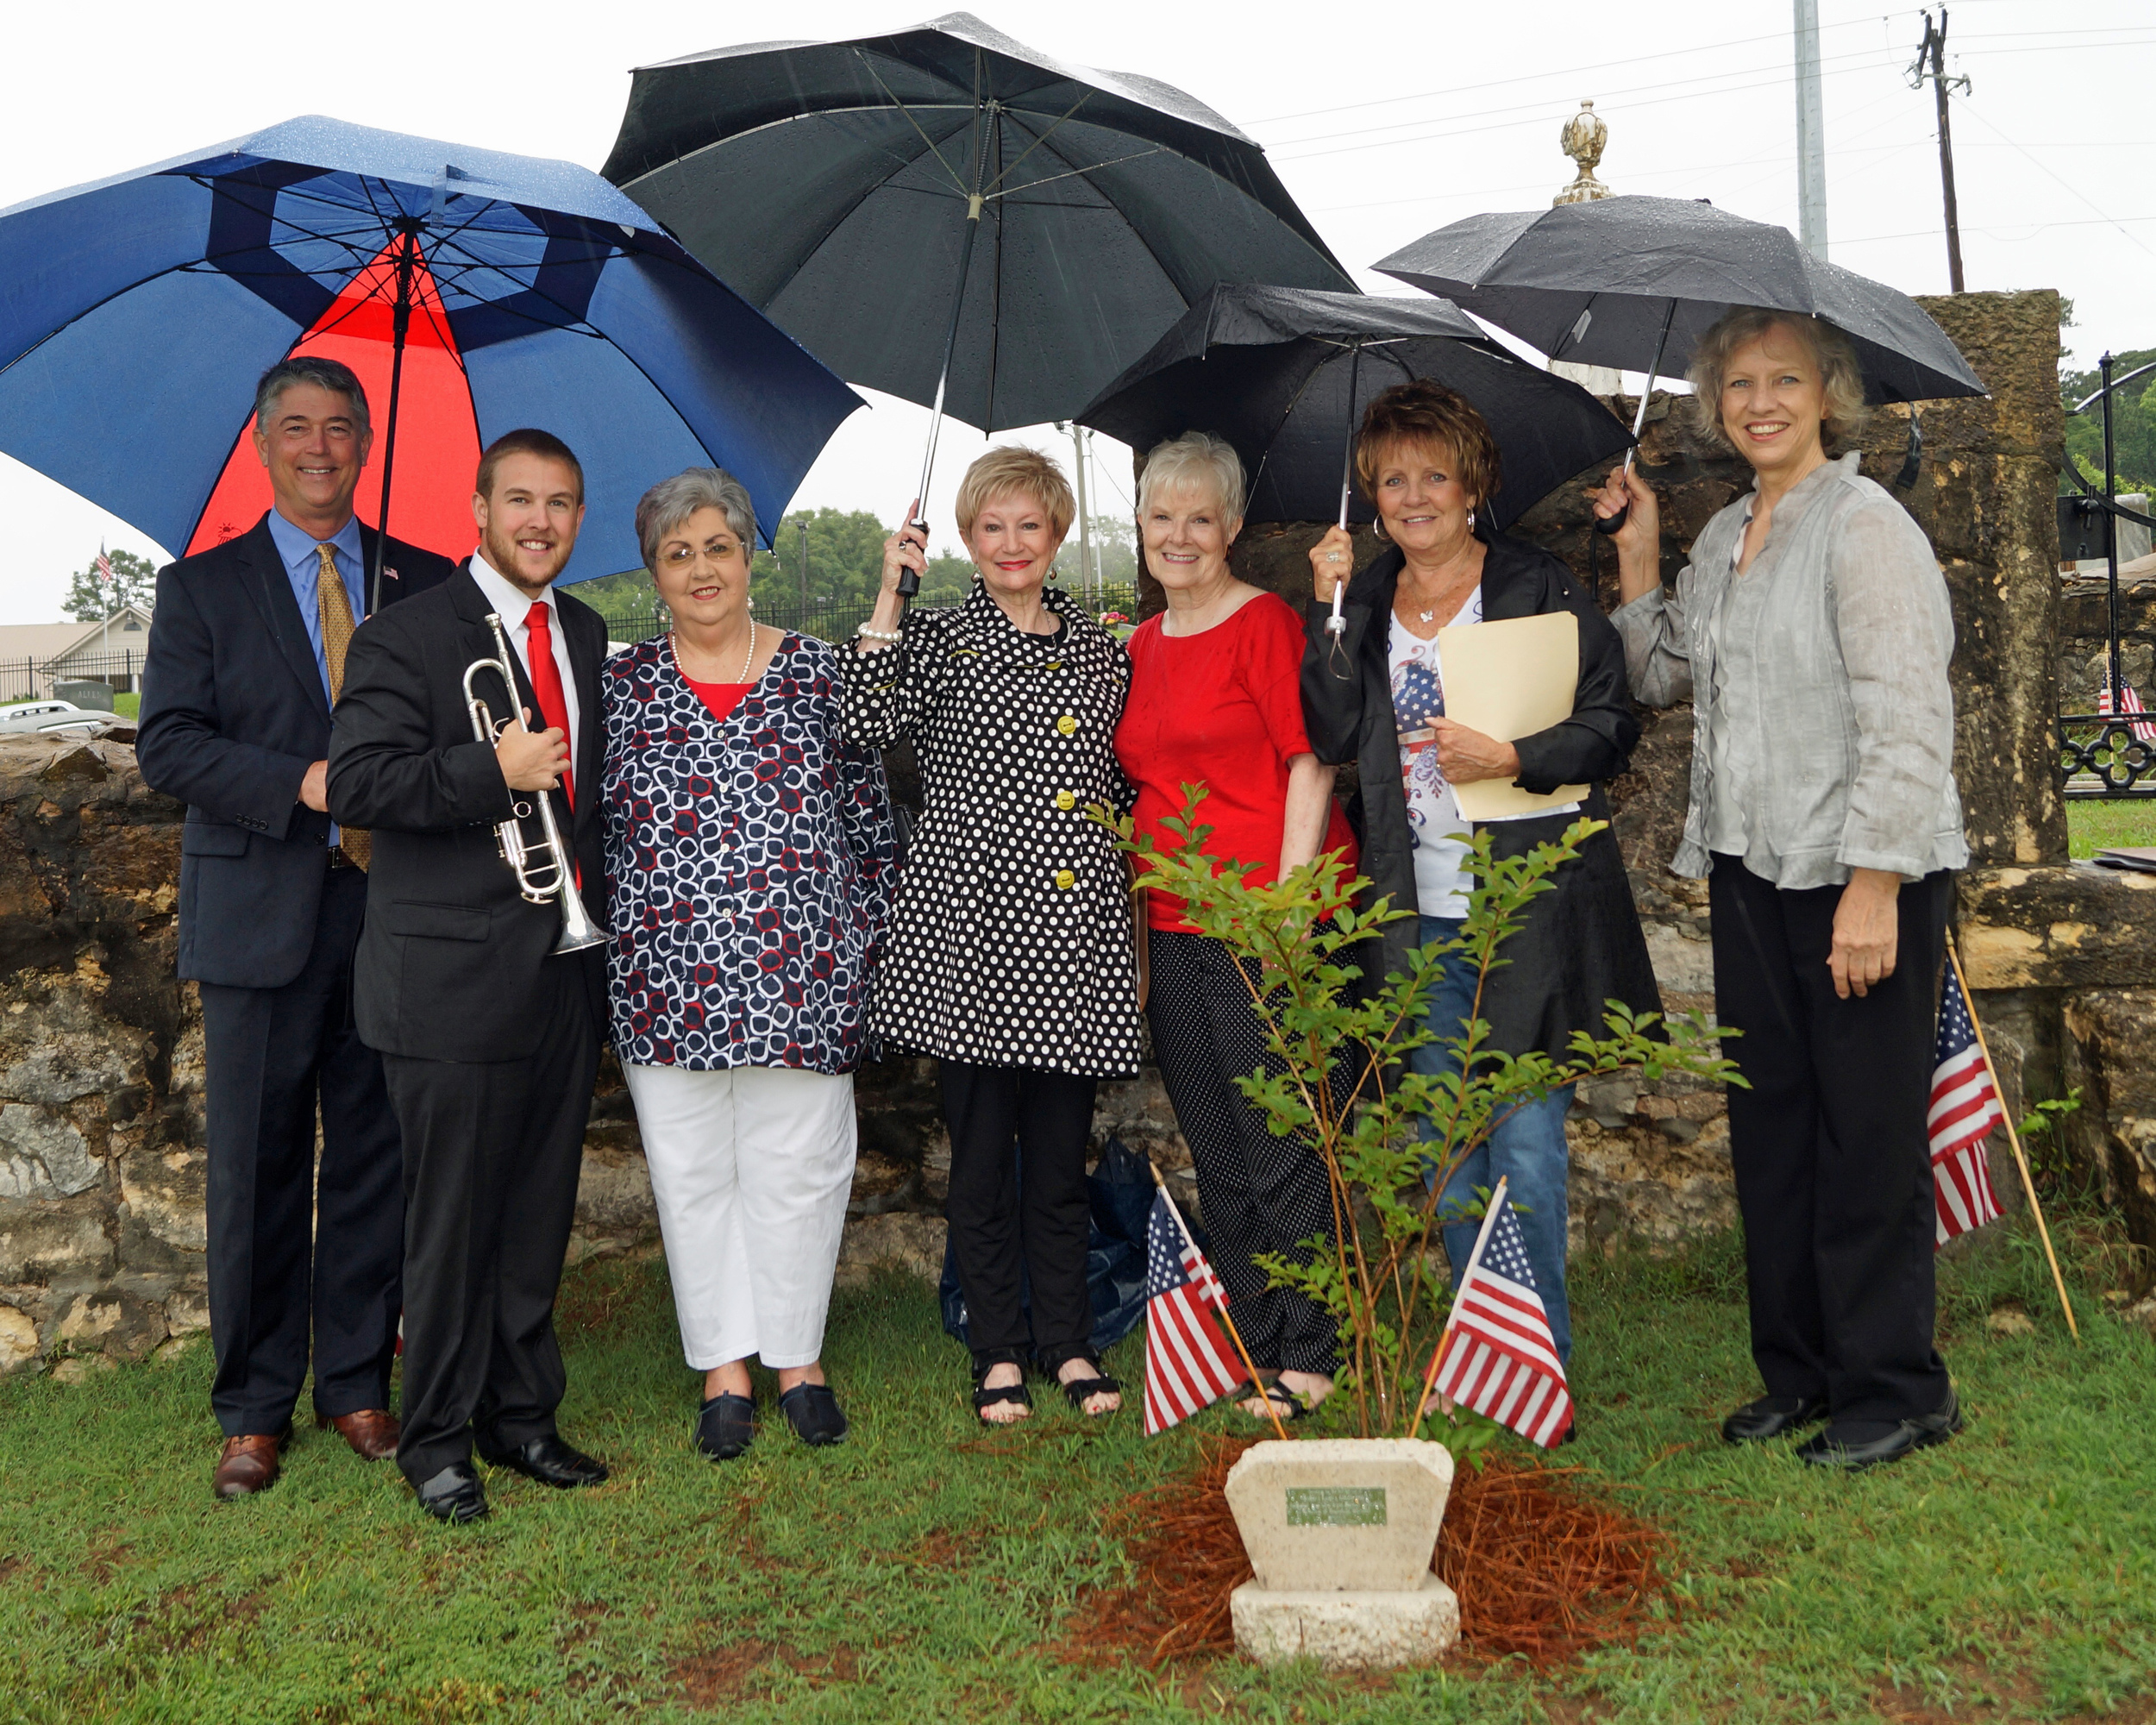   BRANDON GARDEN CLUB DEDICATES&nbsp;MEMORIAL&nbsp;TREE    Brandon Garden Club (BGC) planted and dedicated a crape myrtle&nbsp;tree&nbsp;in Old Brandon Cemetery in memory of Robert Lowry, Governor of Mississippi from 1881-1889.&nbsp; Participating in